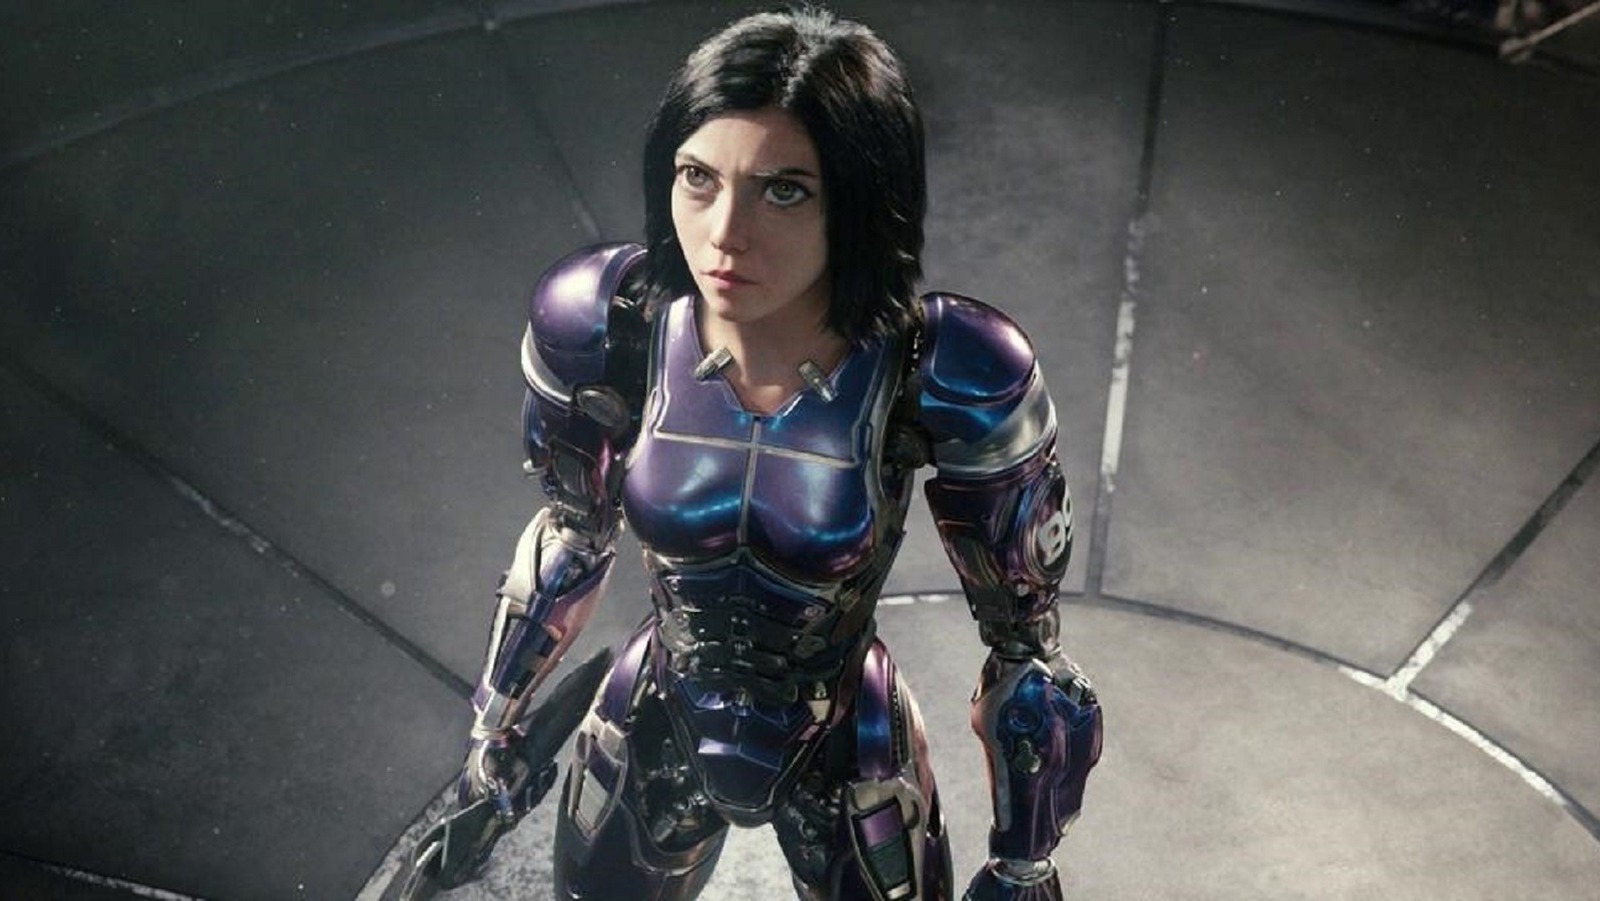 Alita Battle Angel James Cameron S Sequels May Cover These 3 Story Arcs